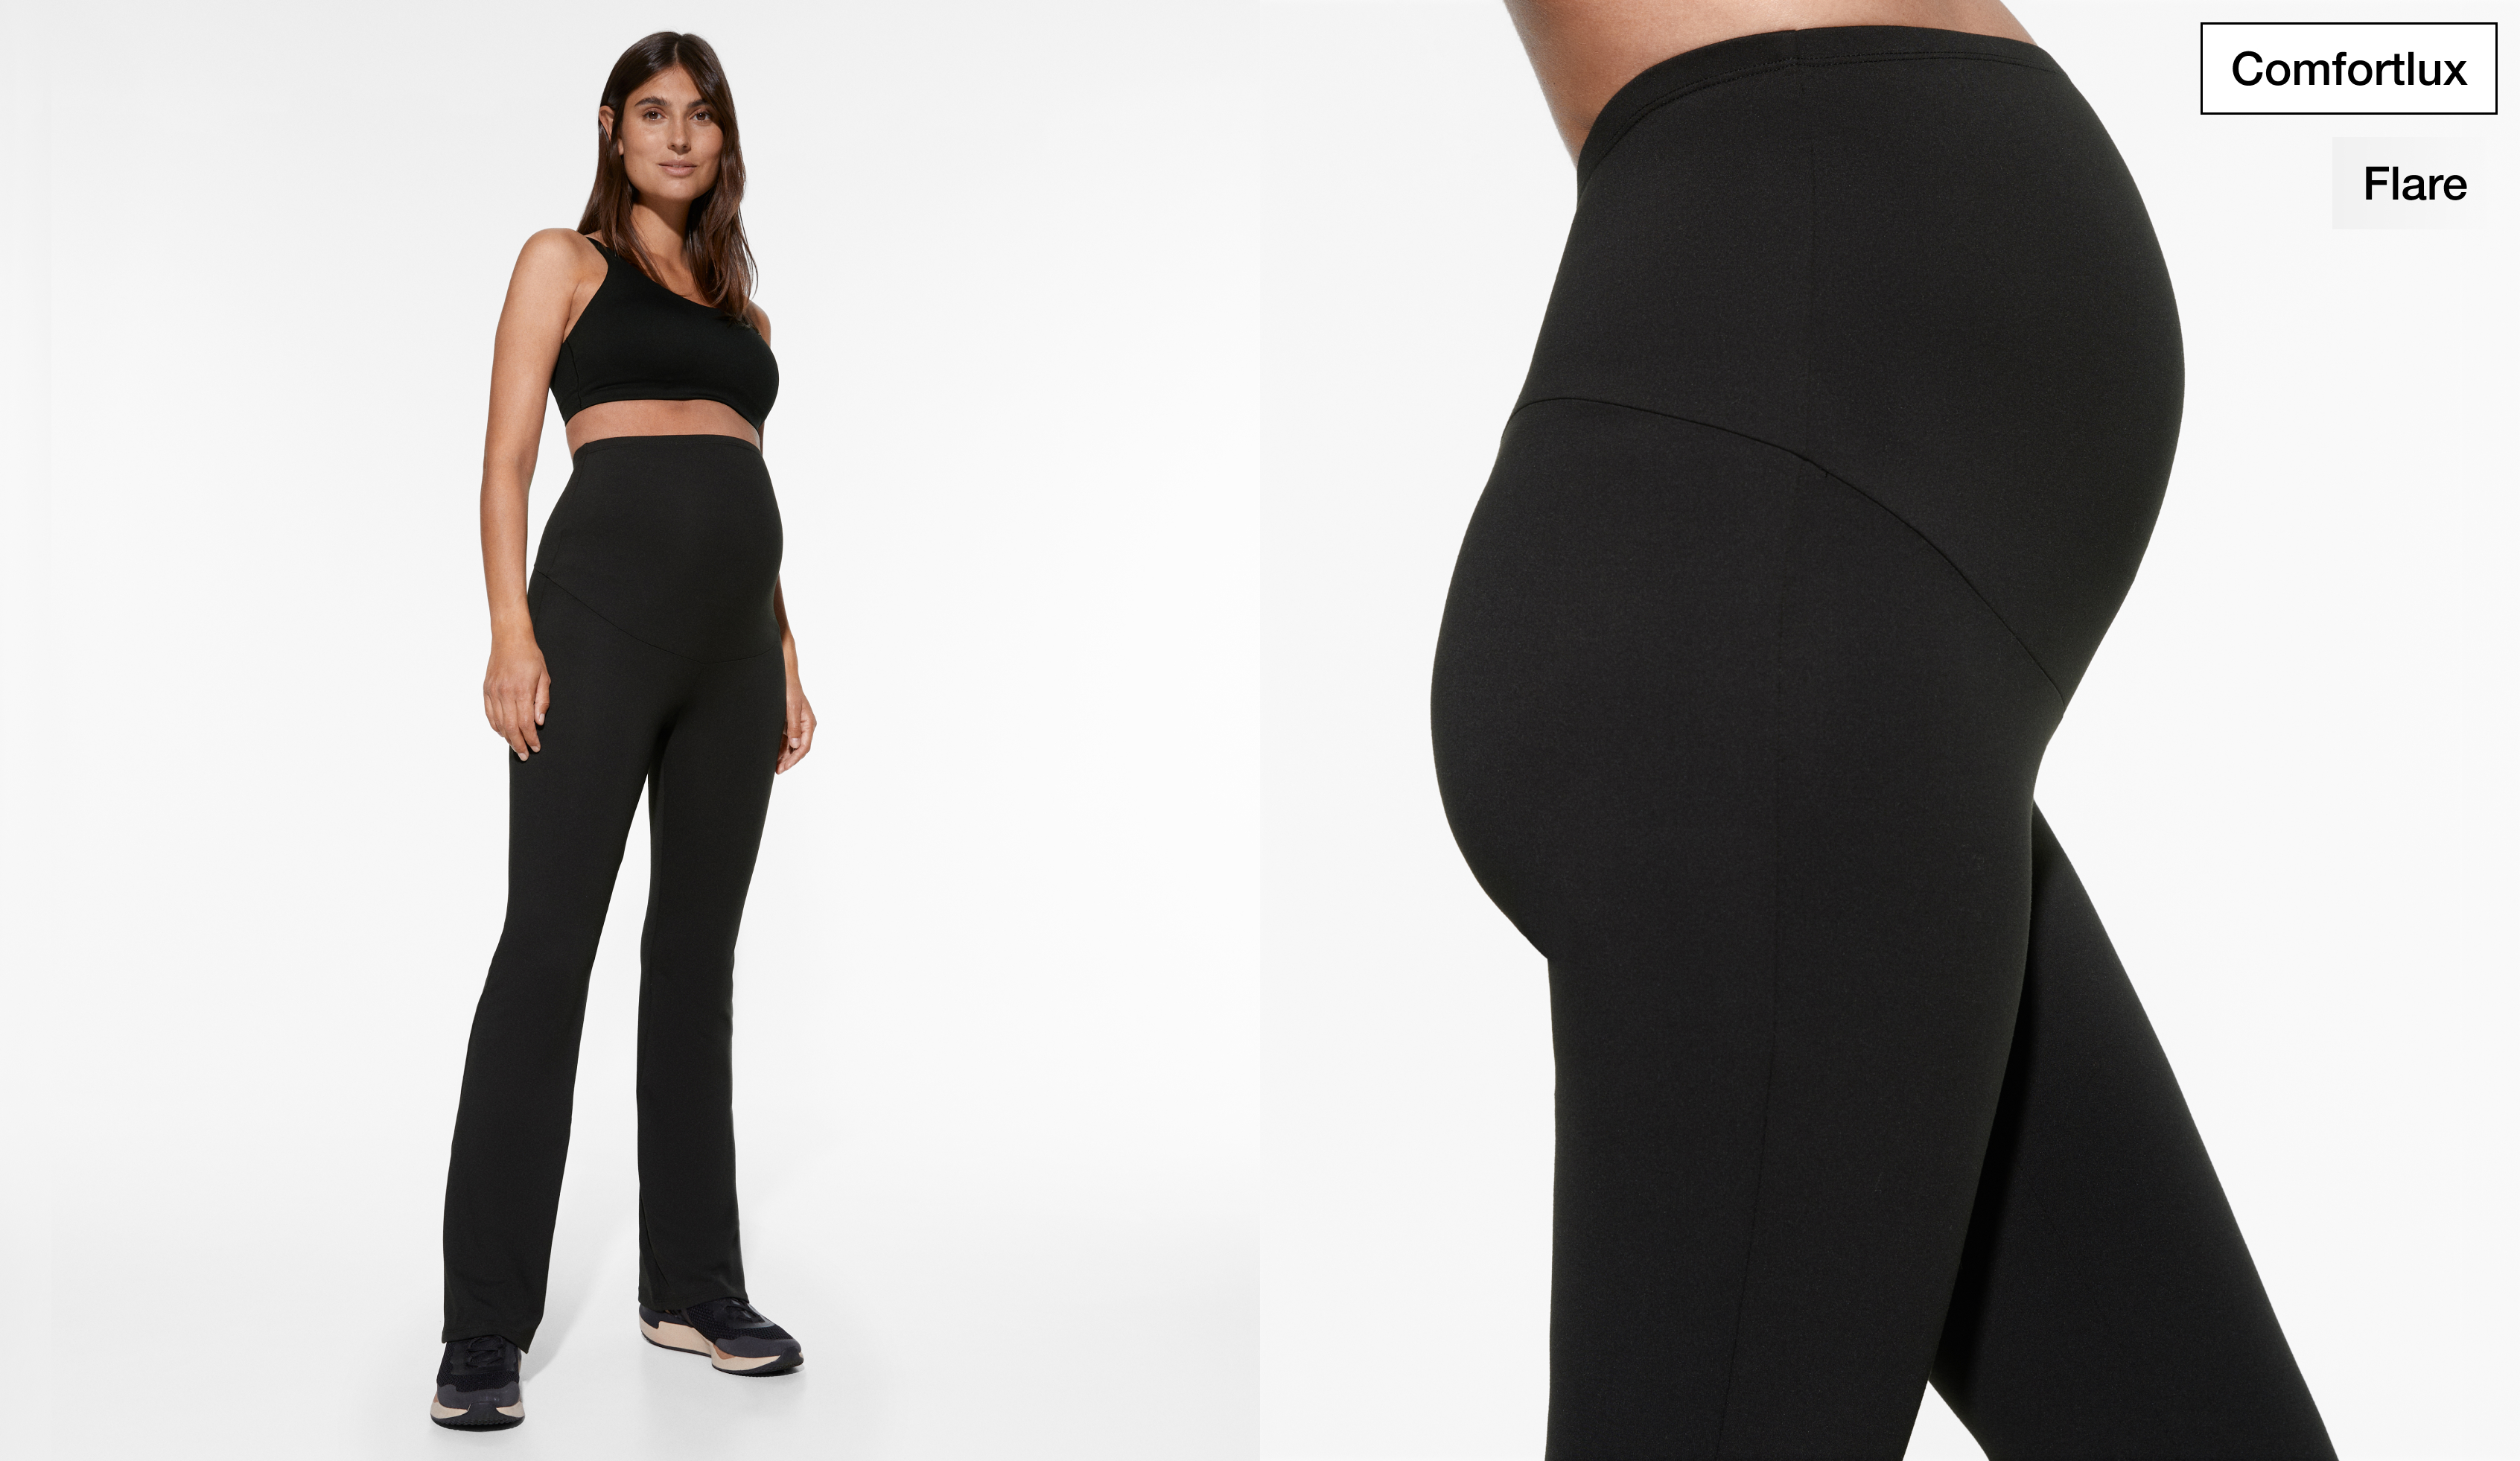 Comfortlux maternity flare trousers